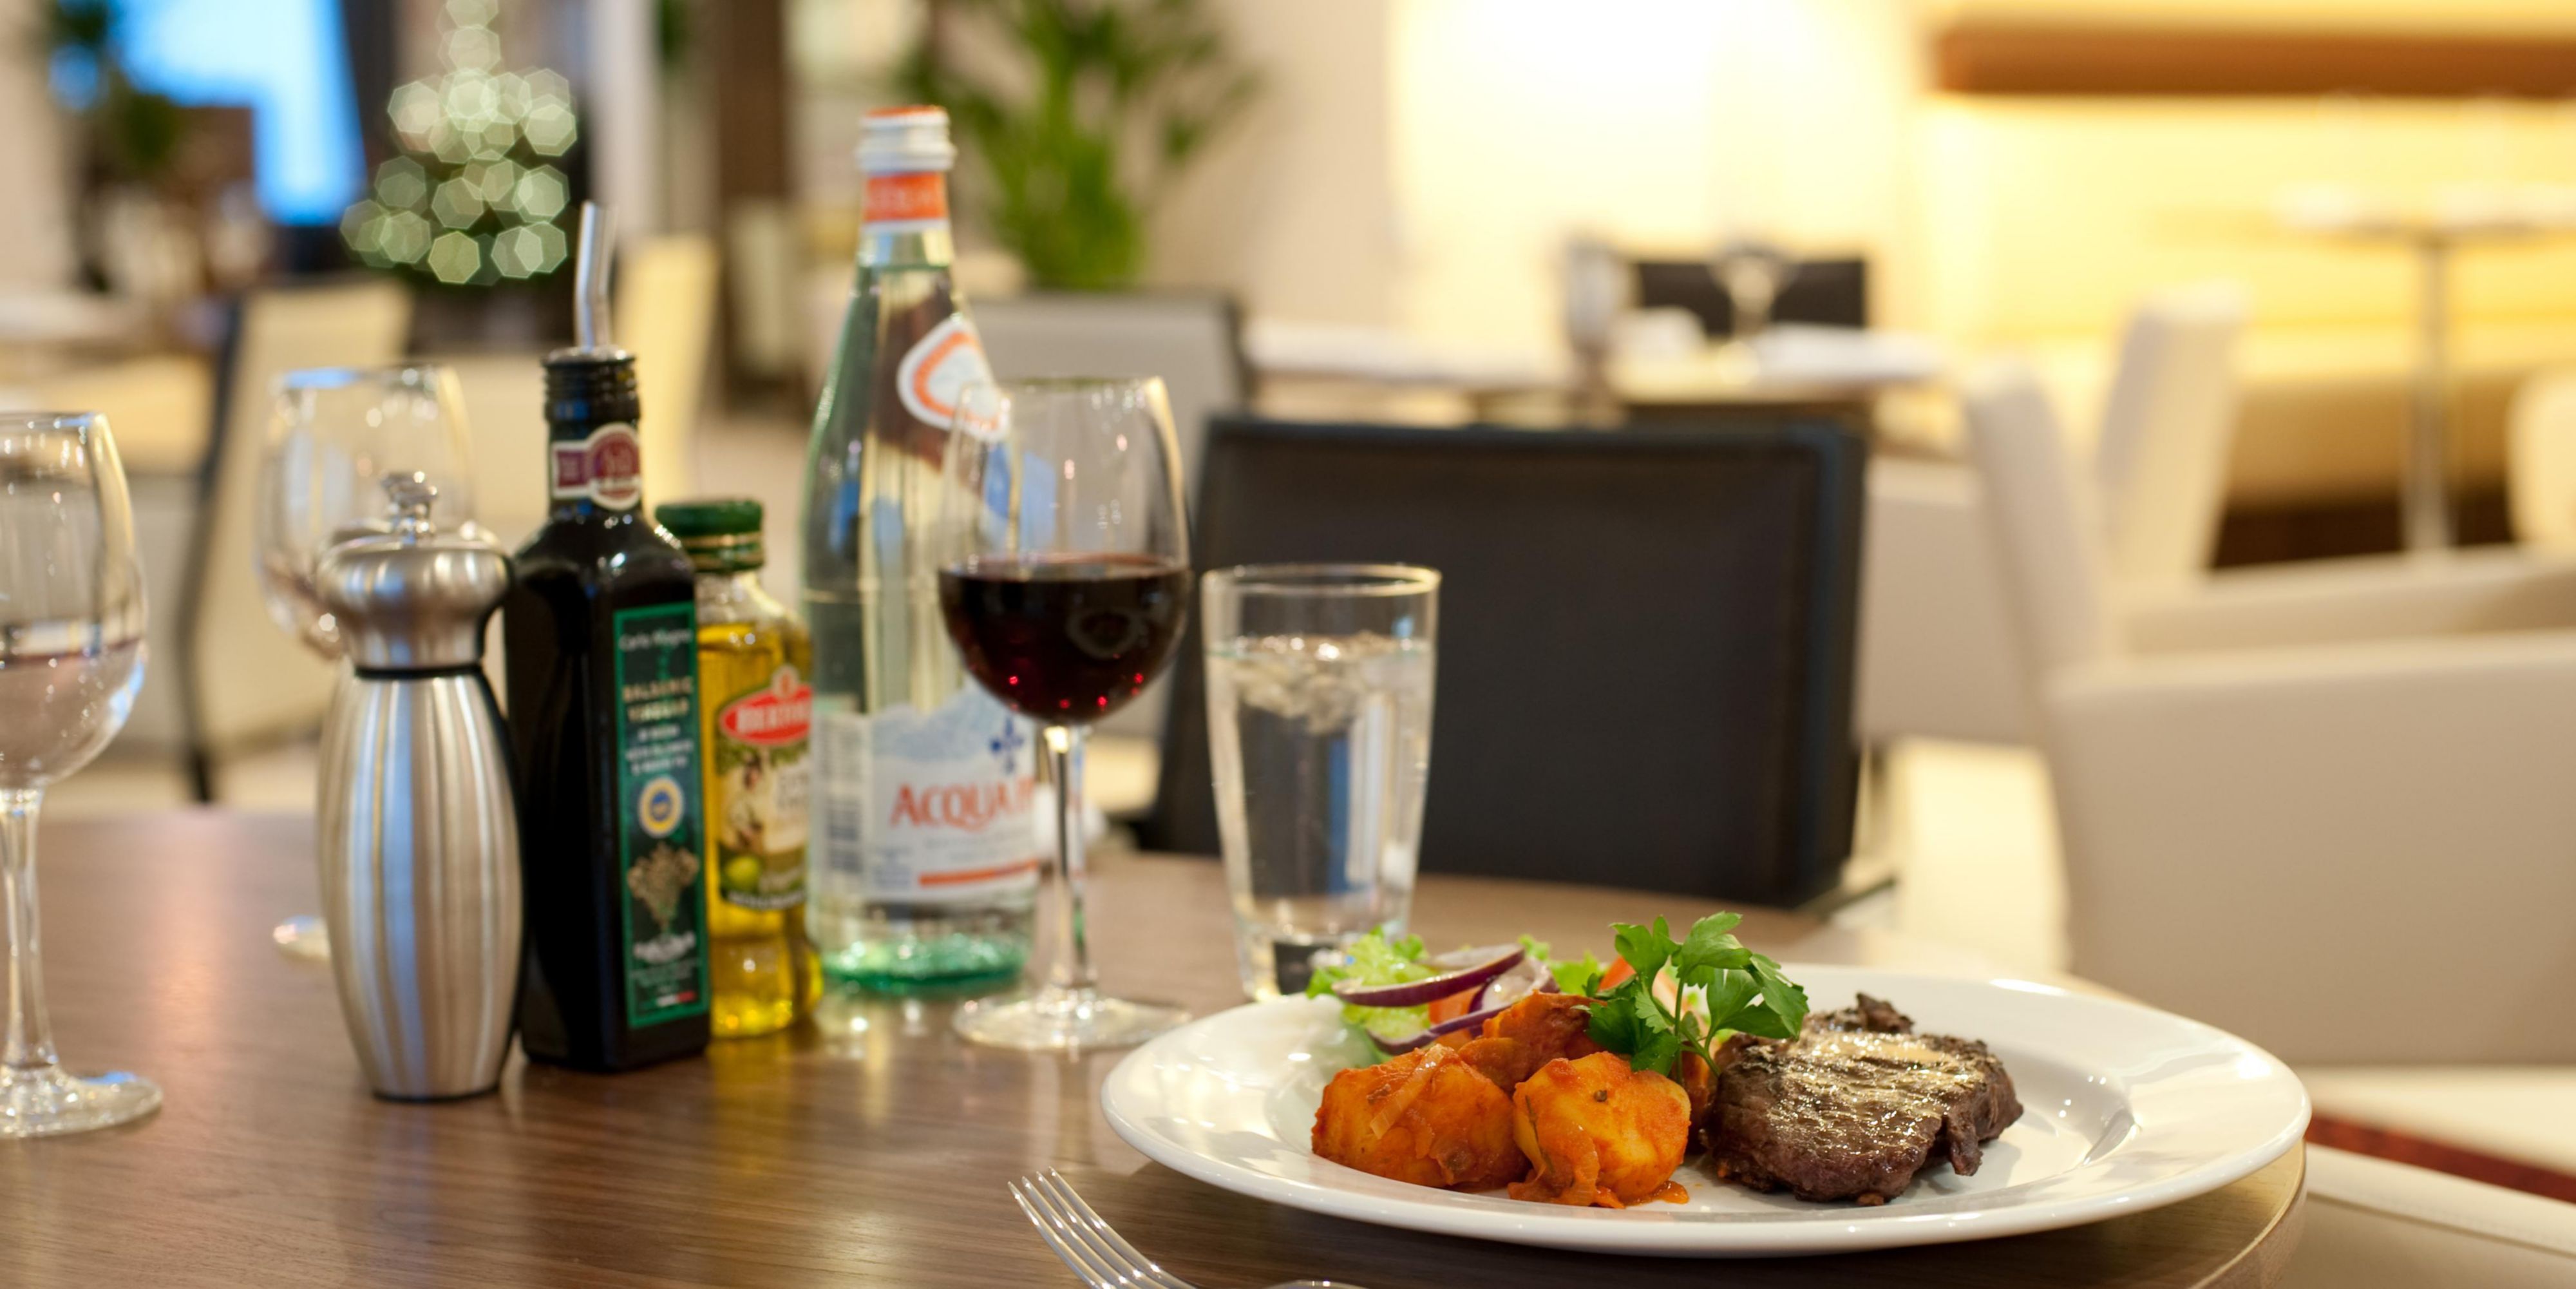 Why not try one of our delicious dishes in our restaurant?